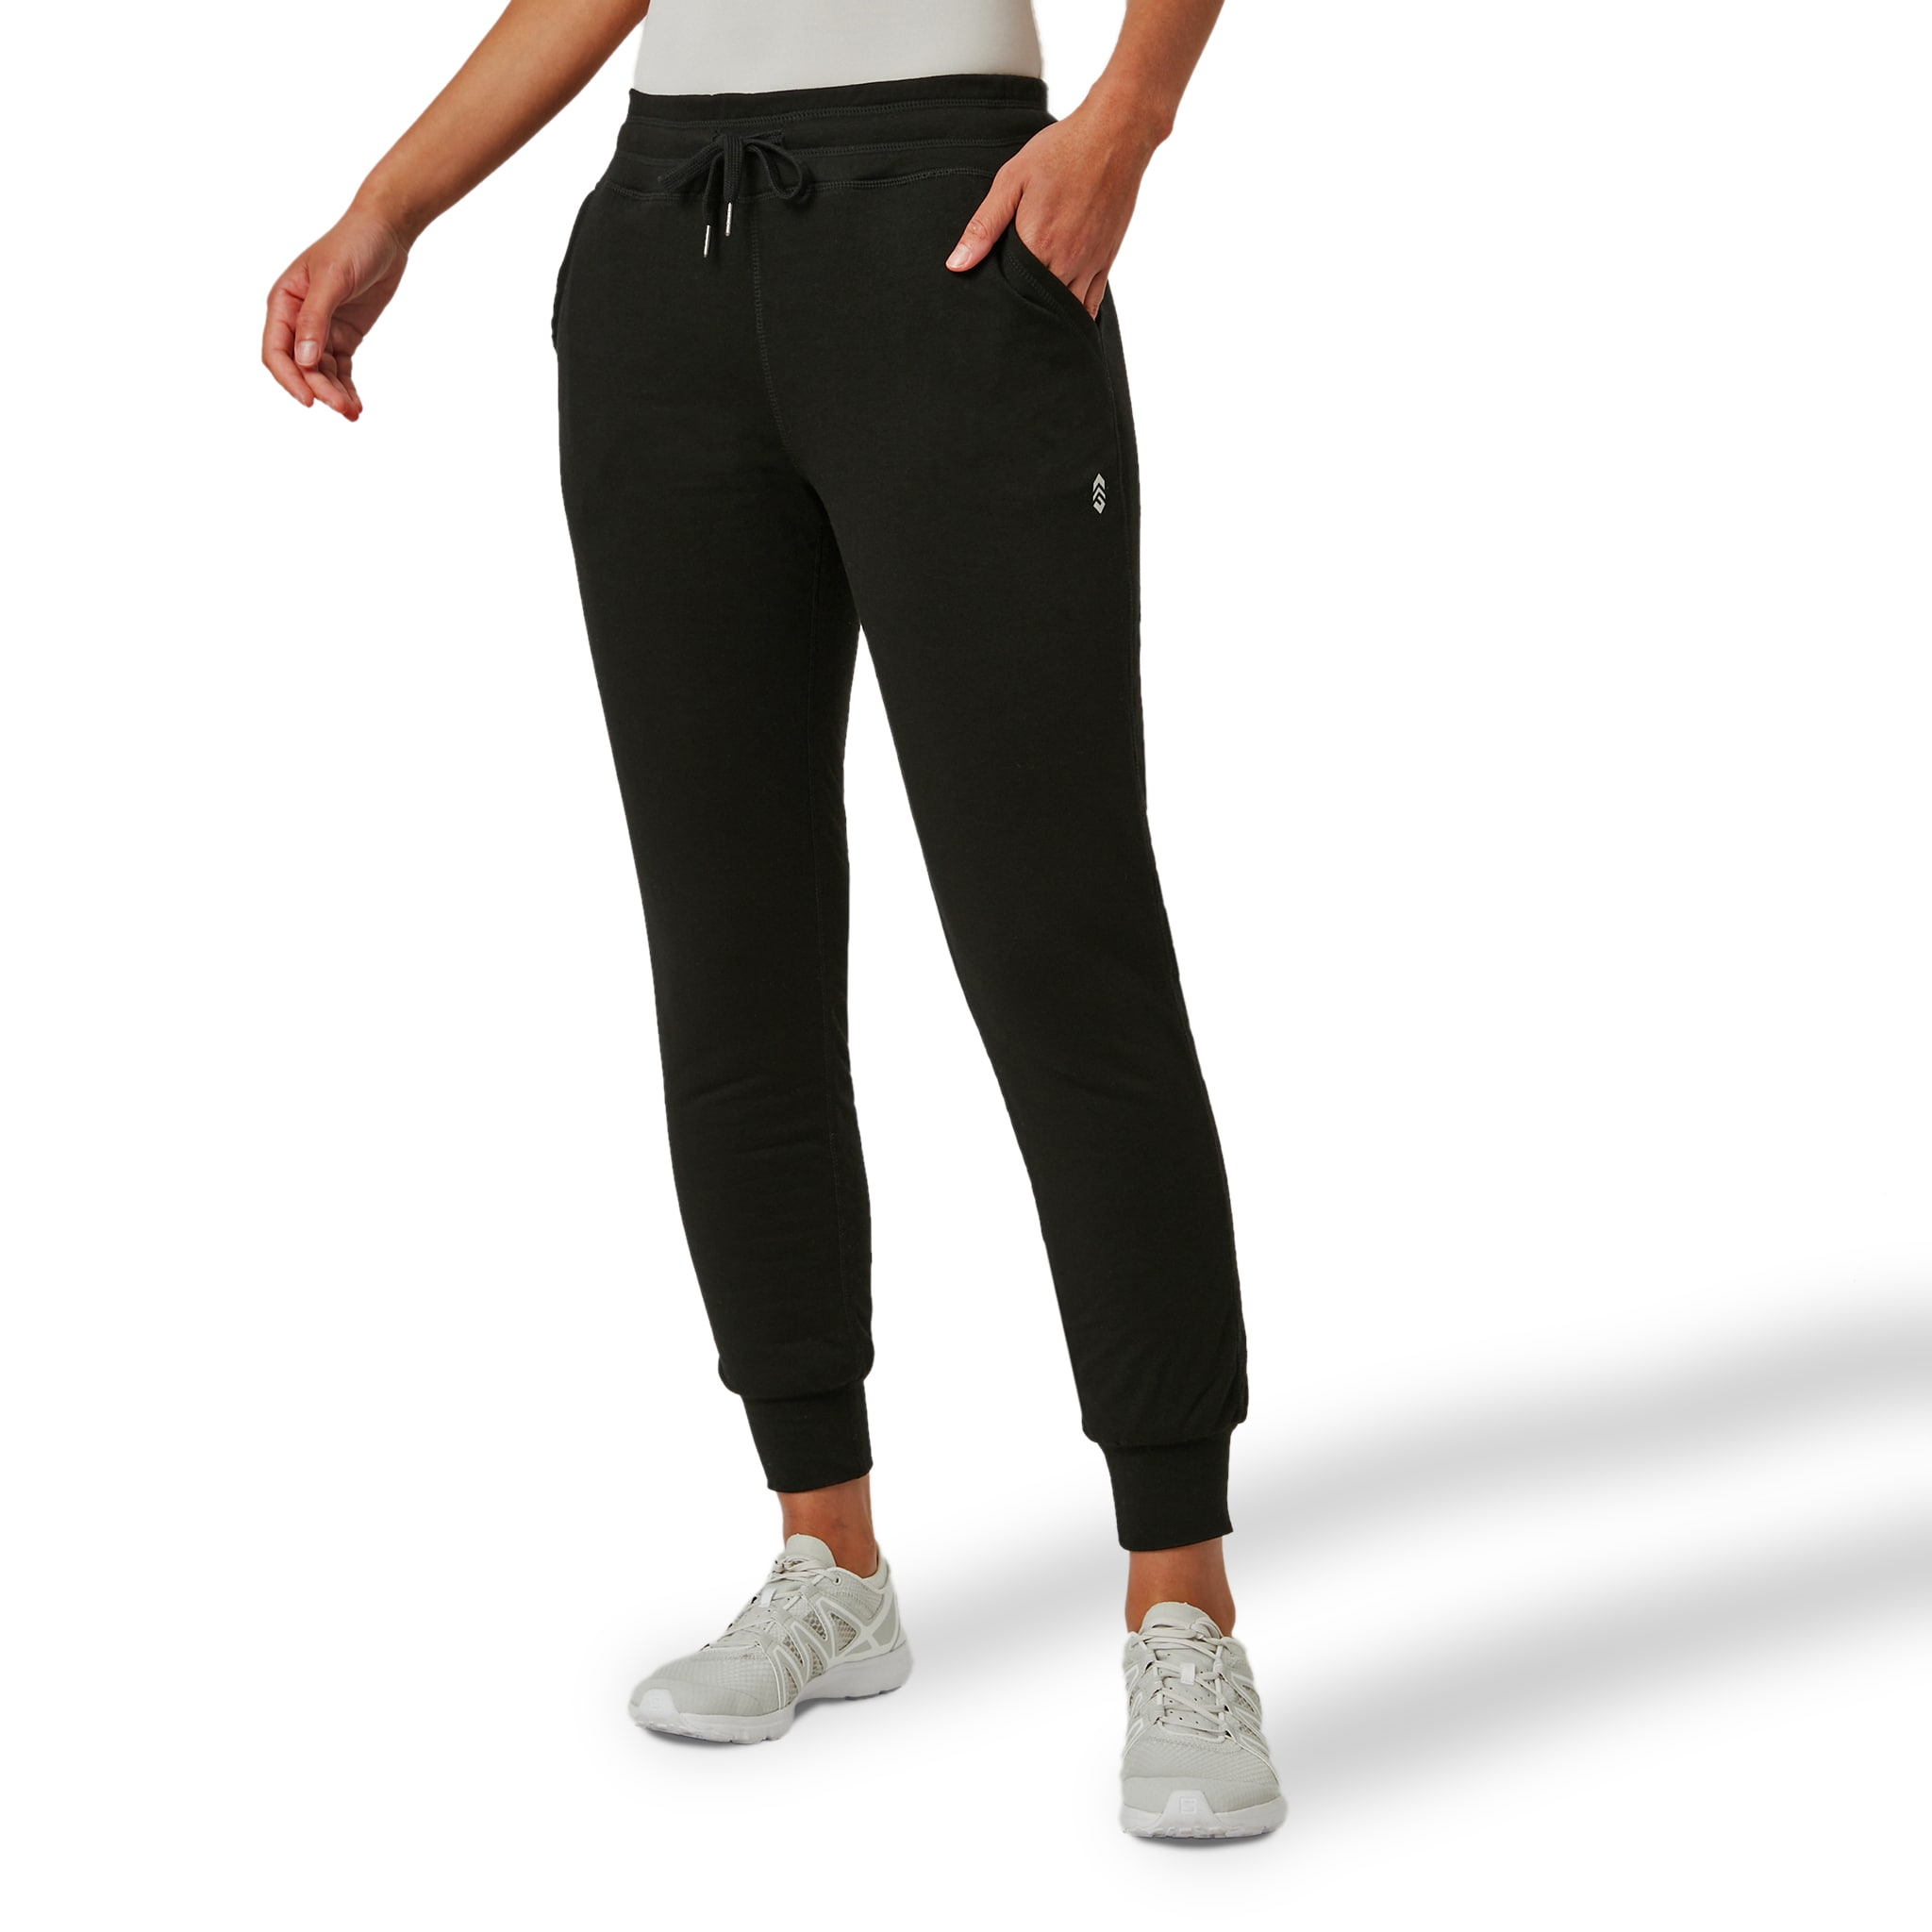 Free Country Women's Luxe Jogger Pants - Black L, Large Size, Multi ...